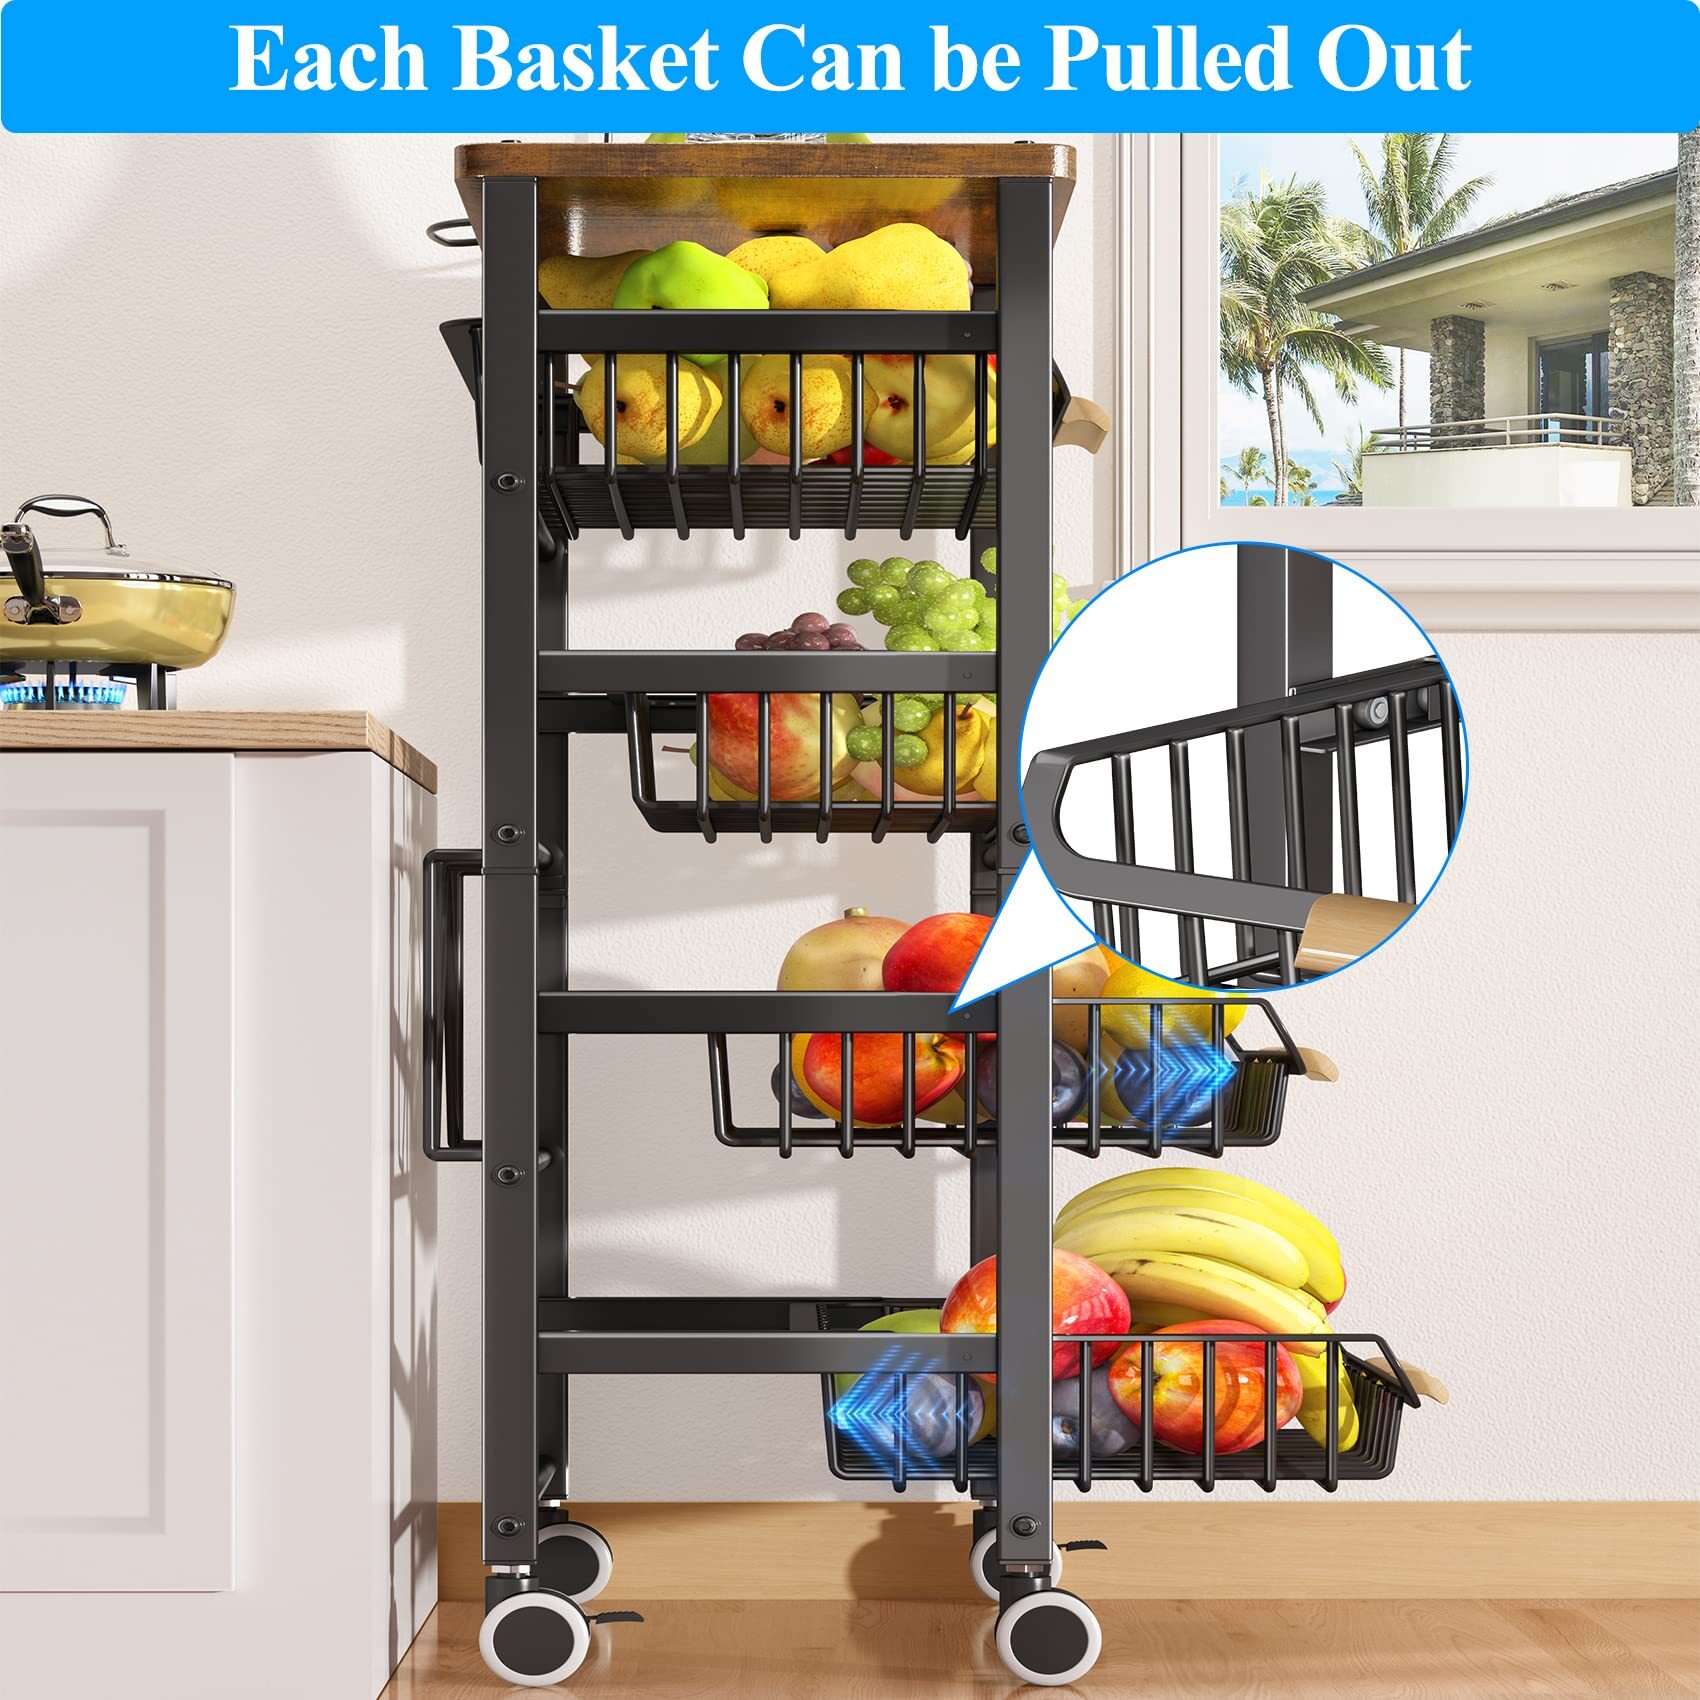 Fruit Basket for Kitchen, 5 Tier Large Pull-out Wire Basket With Wood Top and Wheels, Kitchen Storage Cart for Fruit Vegetable Onions Potatoes Banana, Black